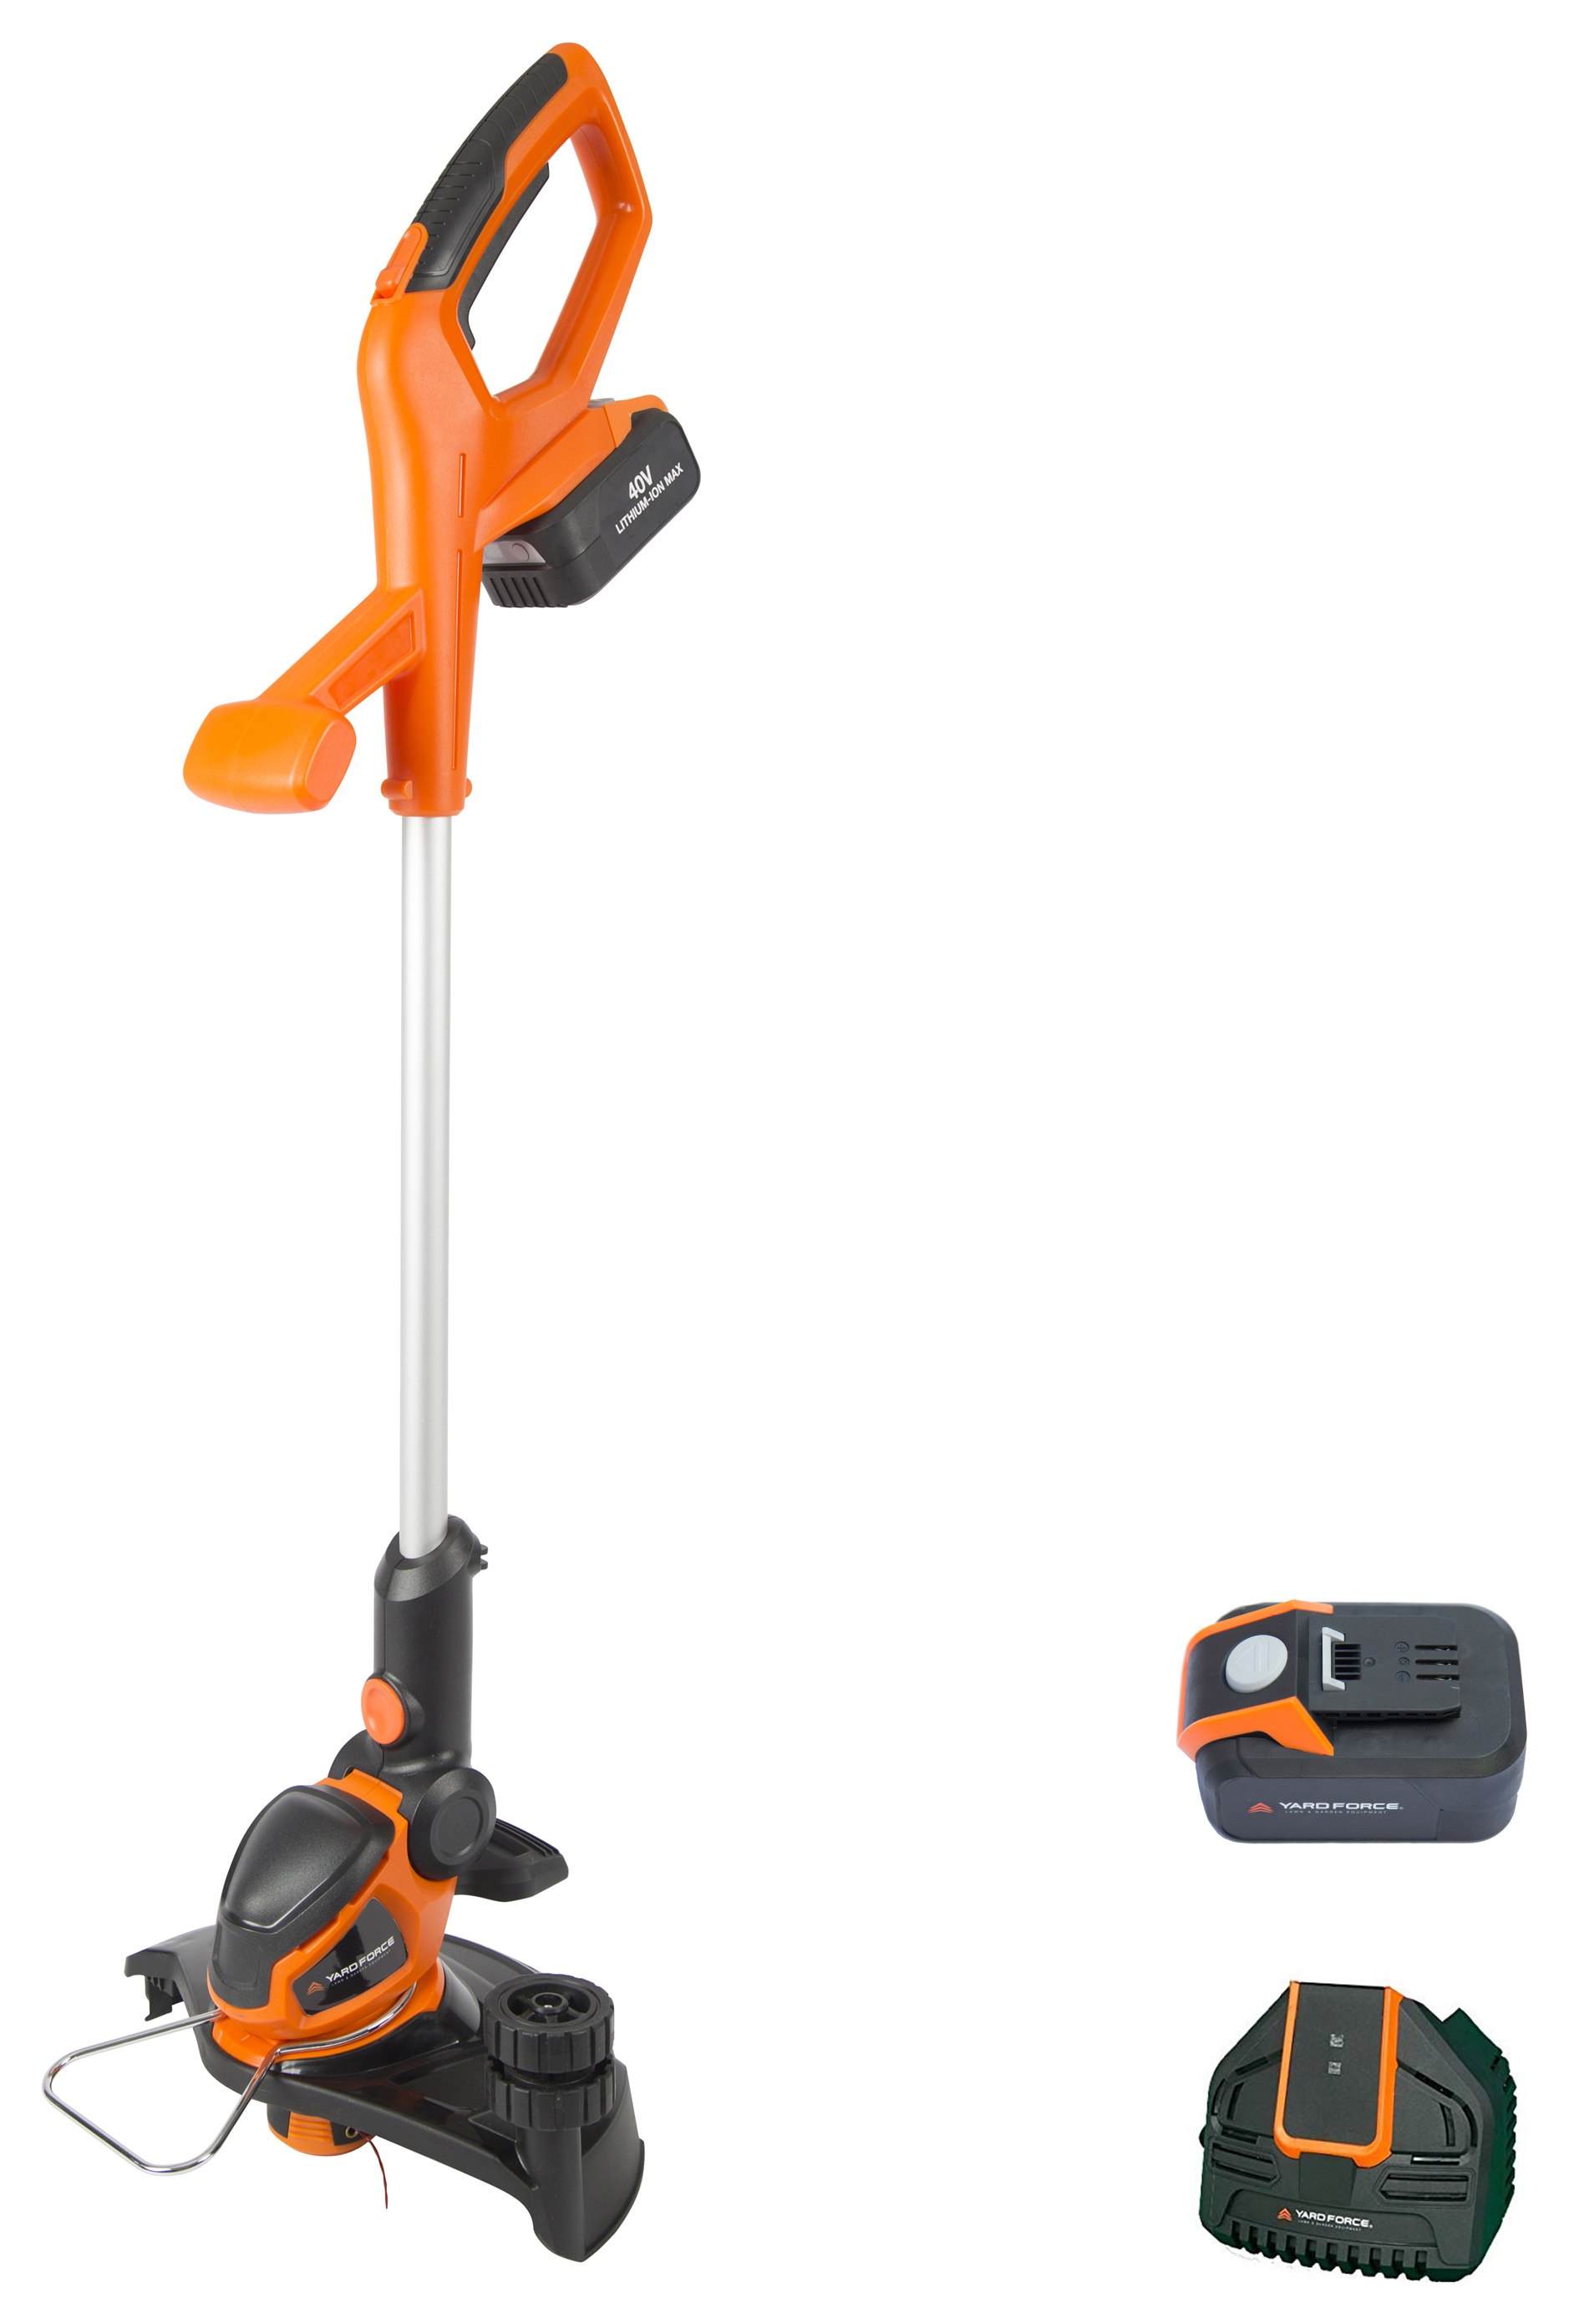 Yard Force LT G30 40V 30cm Cordless Grass Trimmer with 2.5Ah Li-ion Battery & Charger